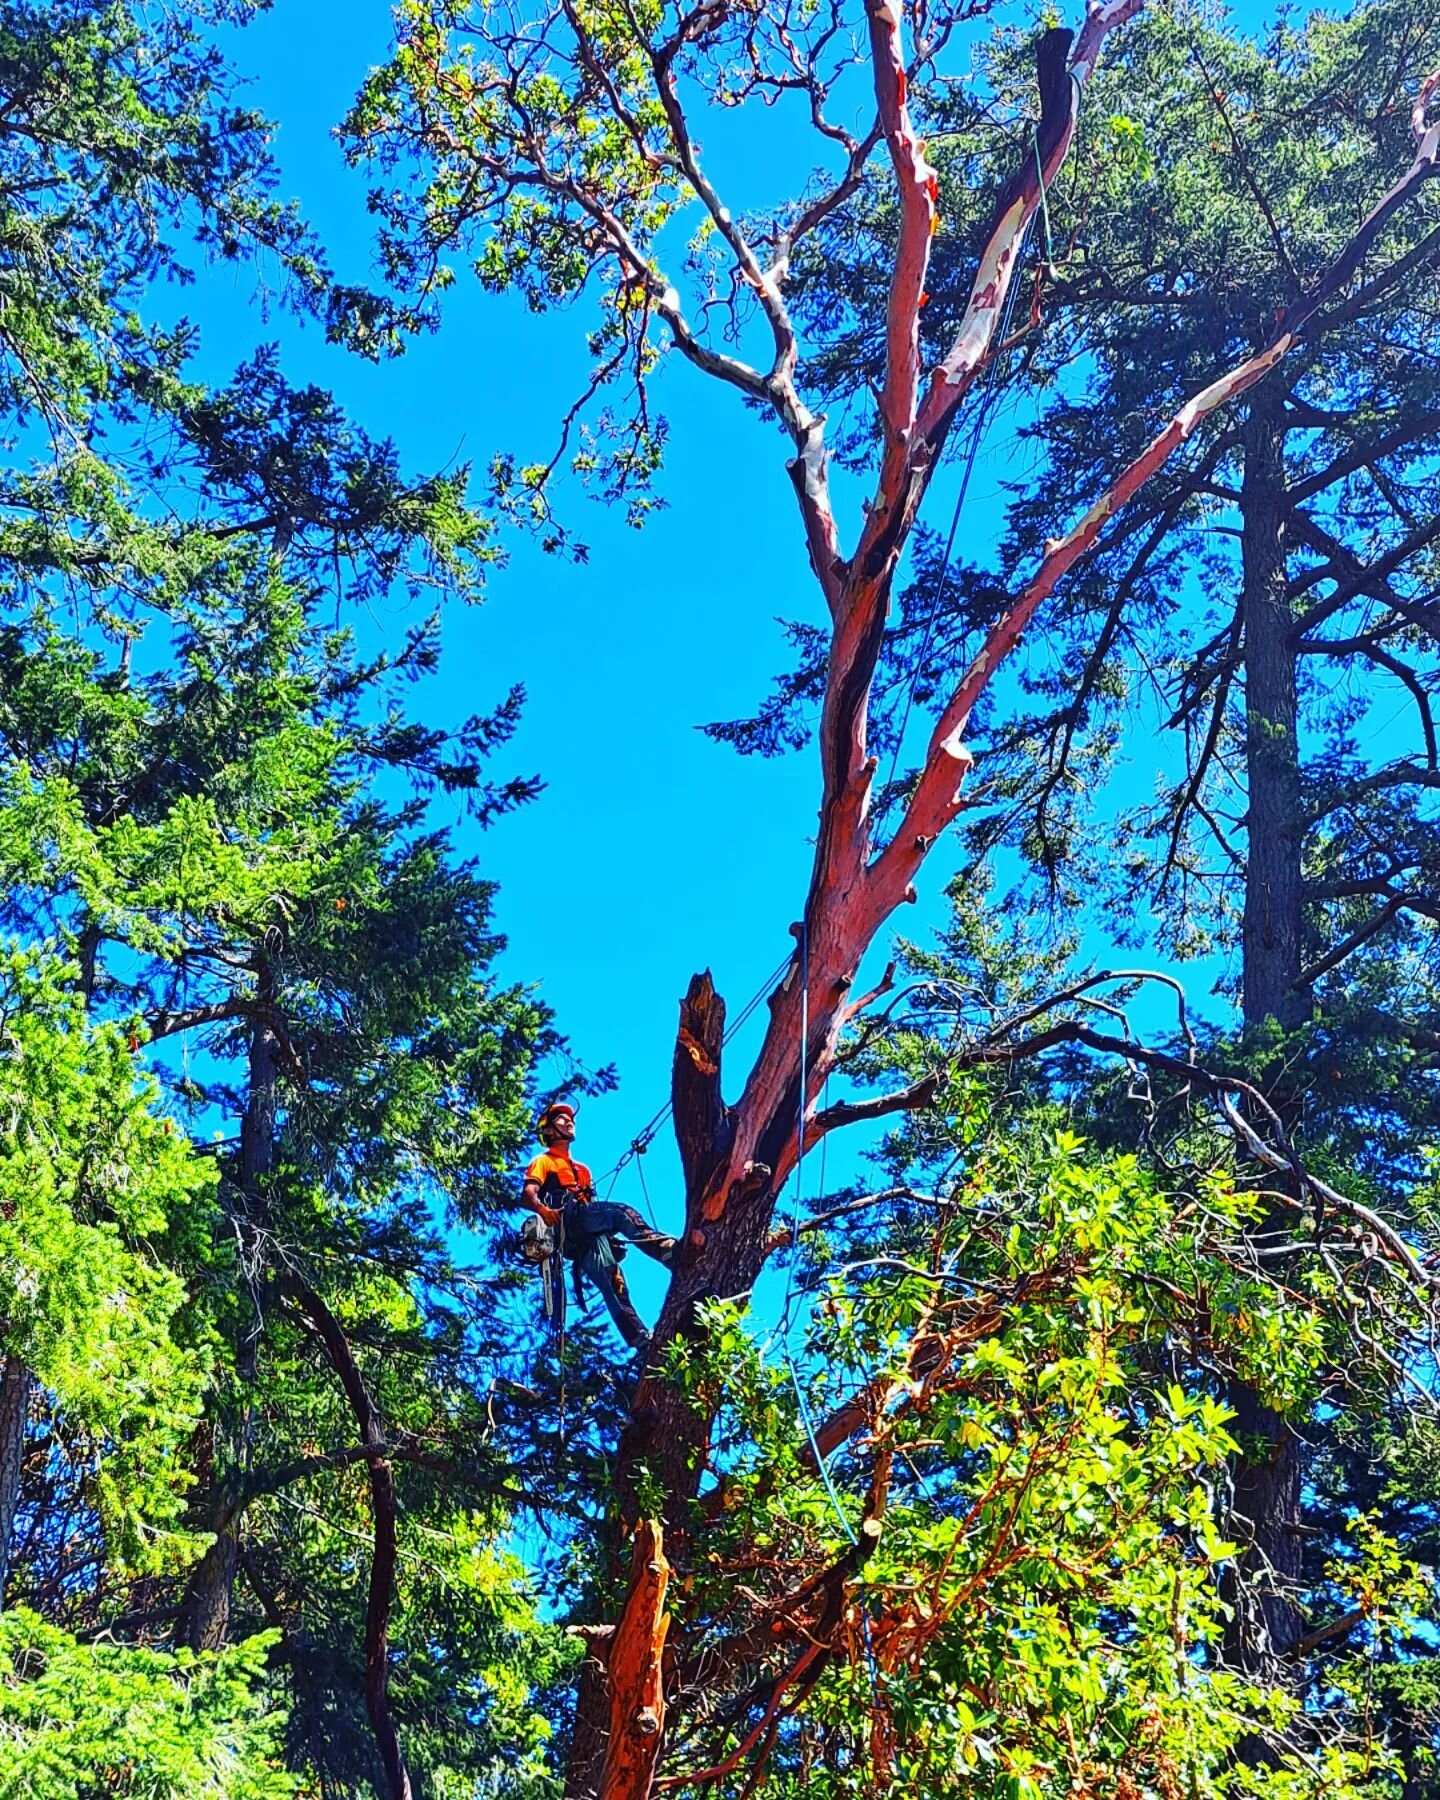 One of Friday's job, dead wooding an Arbutus showing signs of lightning strike.
Nice way to finish off the week.
Good job @isaacoka and team😎🤠🥳

#treesurgeon #treeservice #livetoclimb #summervibes #yyj #pnw #tgif